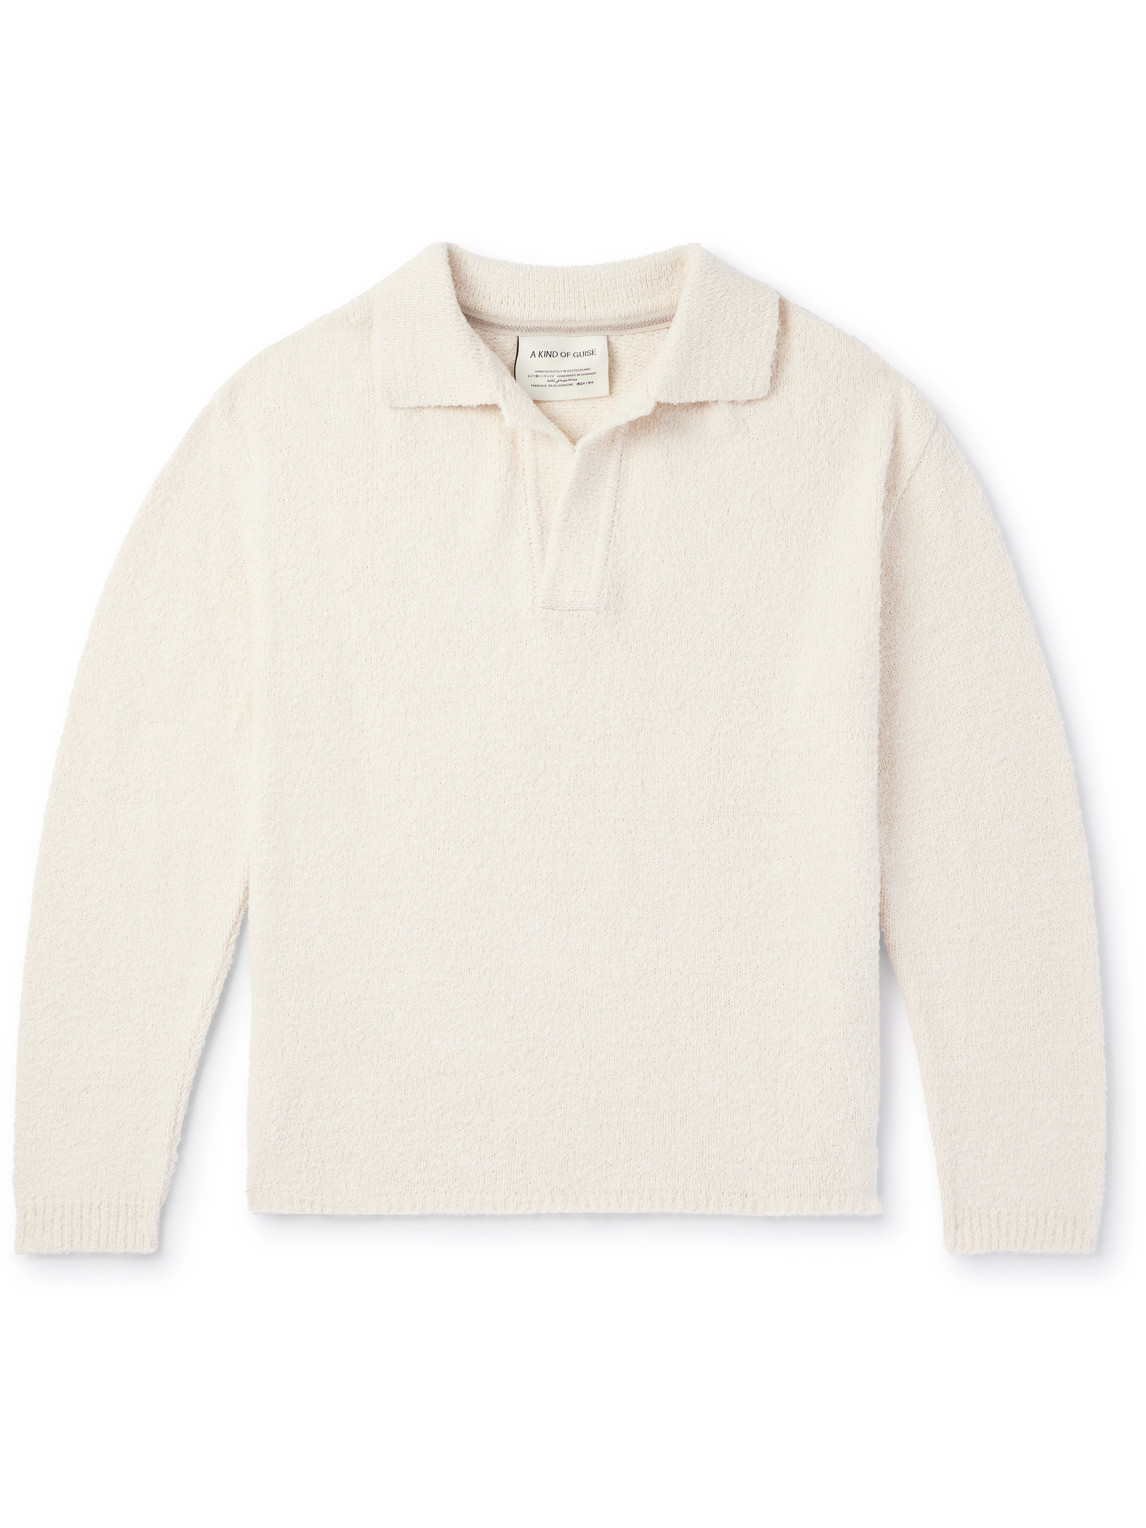 A Kind Of Guise Brushed Organic Cotton Sweater In White